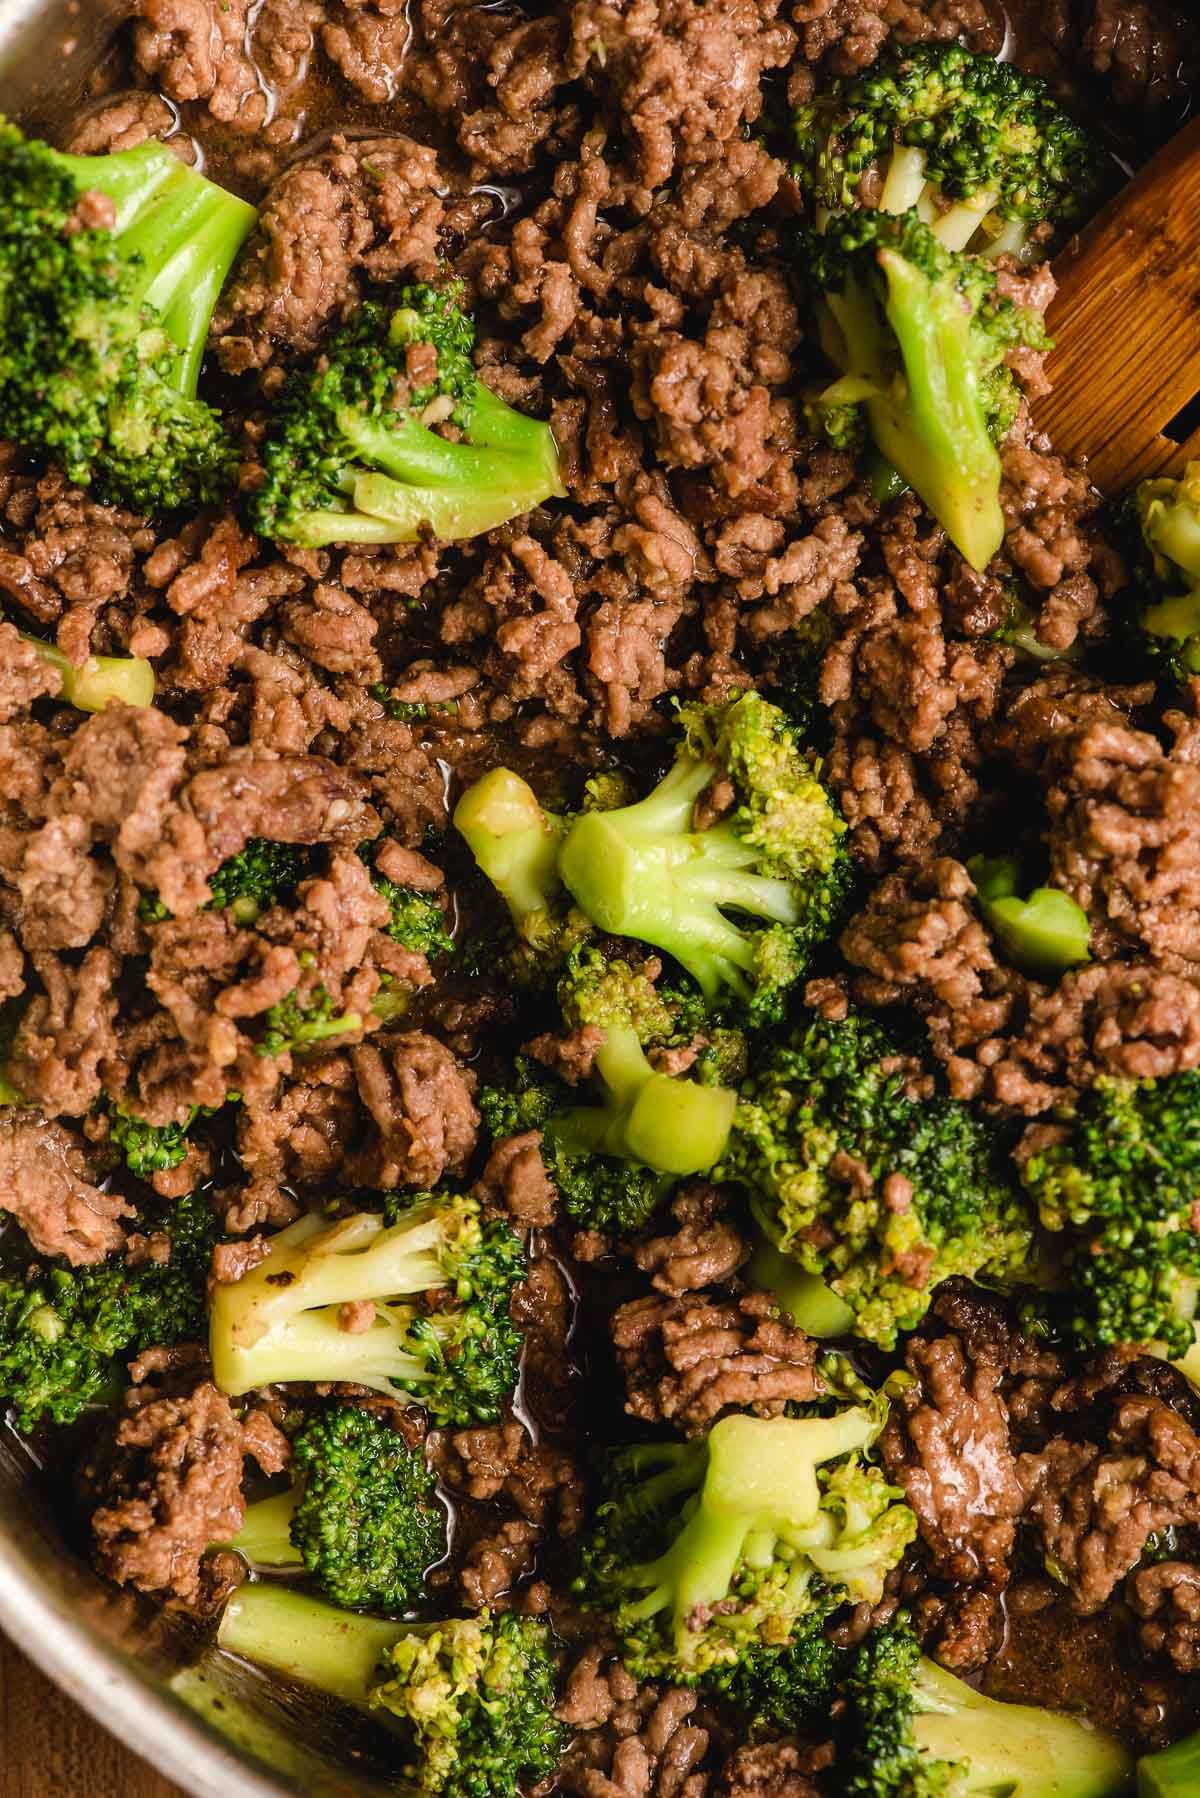 Close up image of ground beef and broccoli.